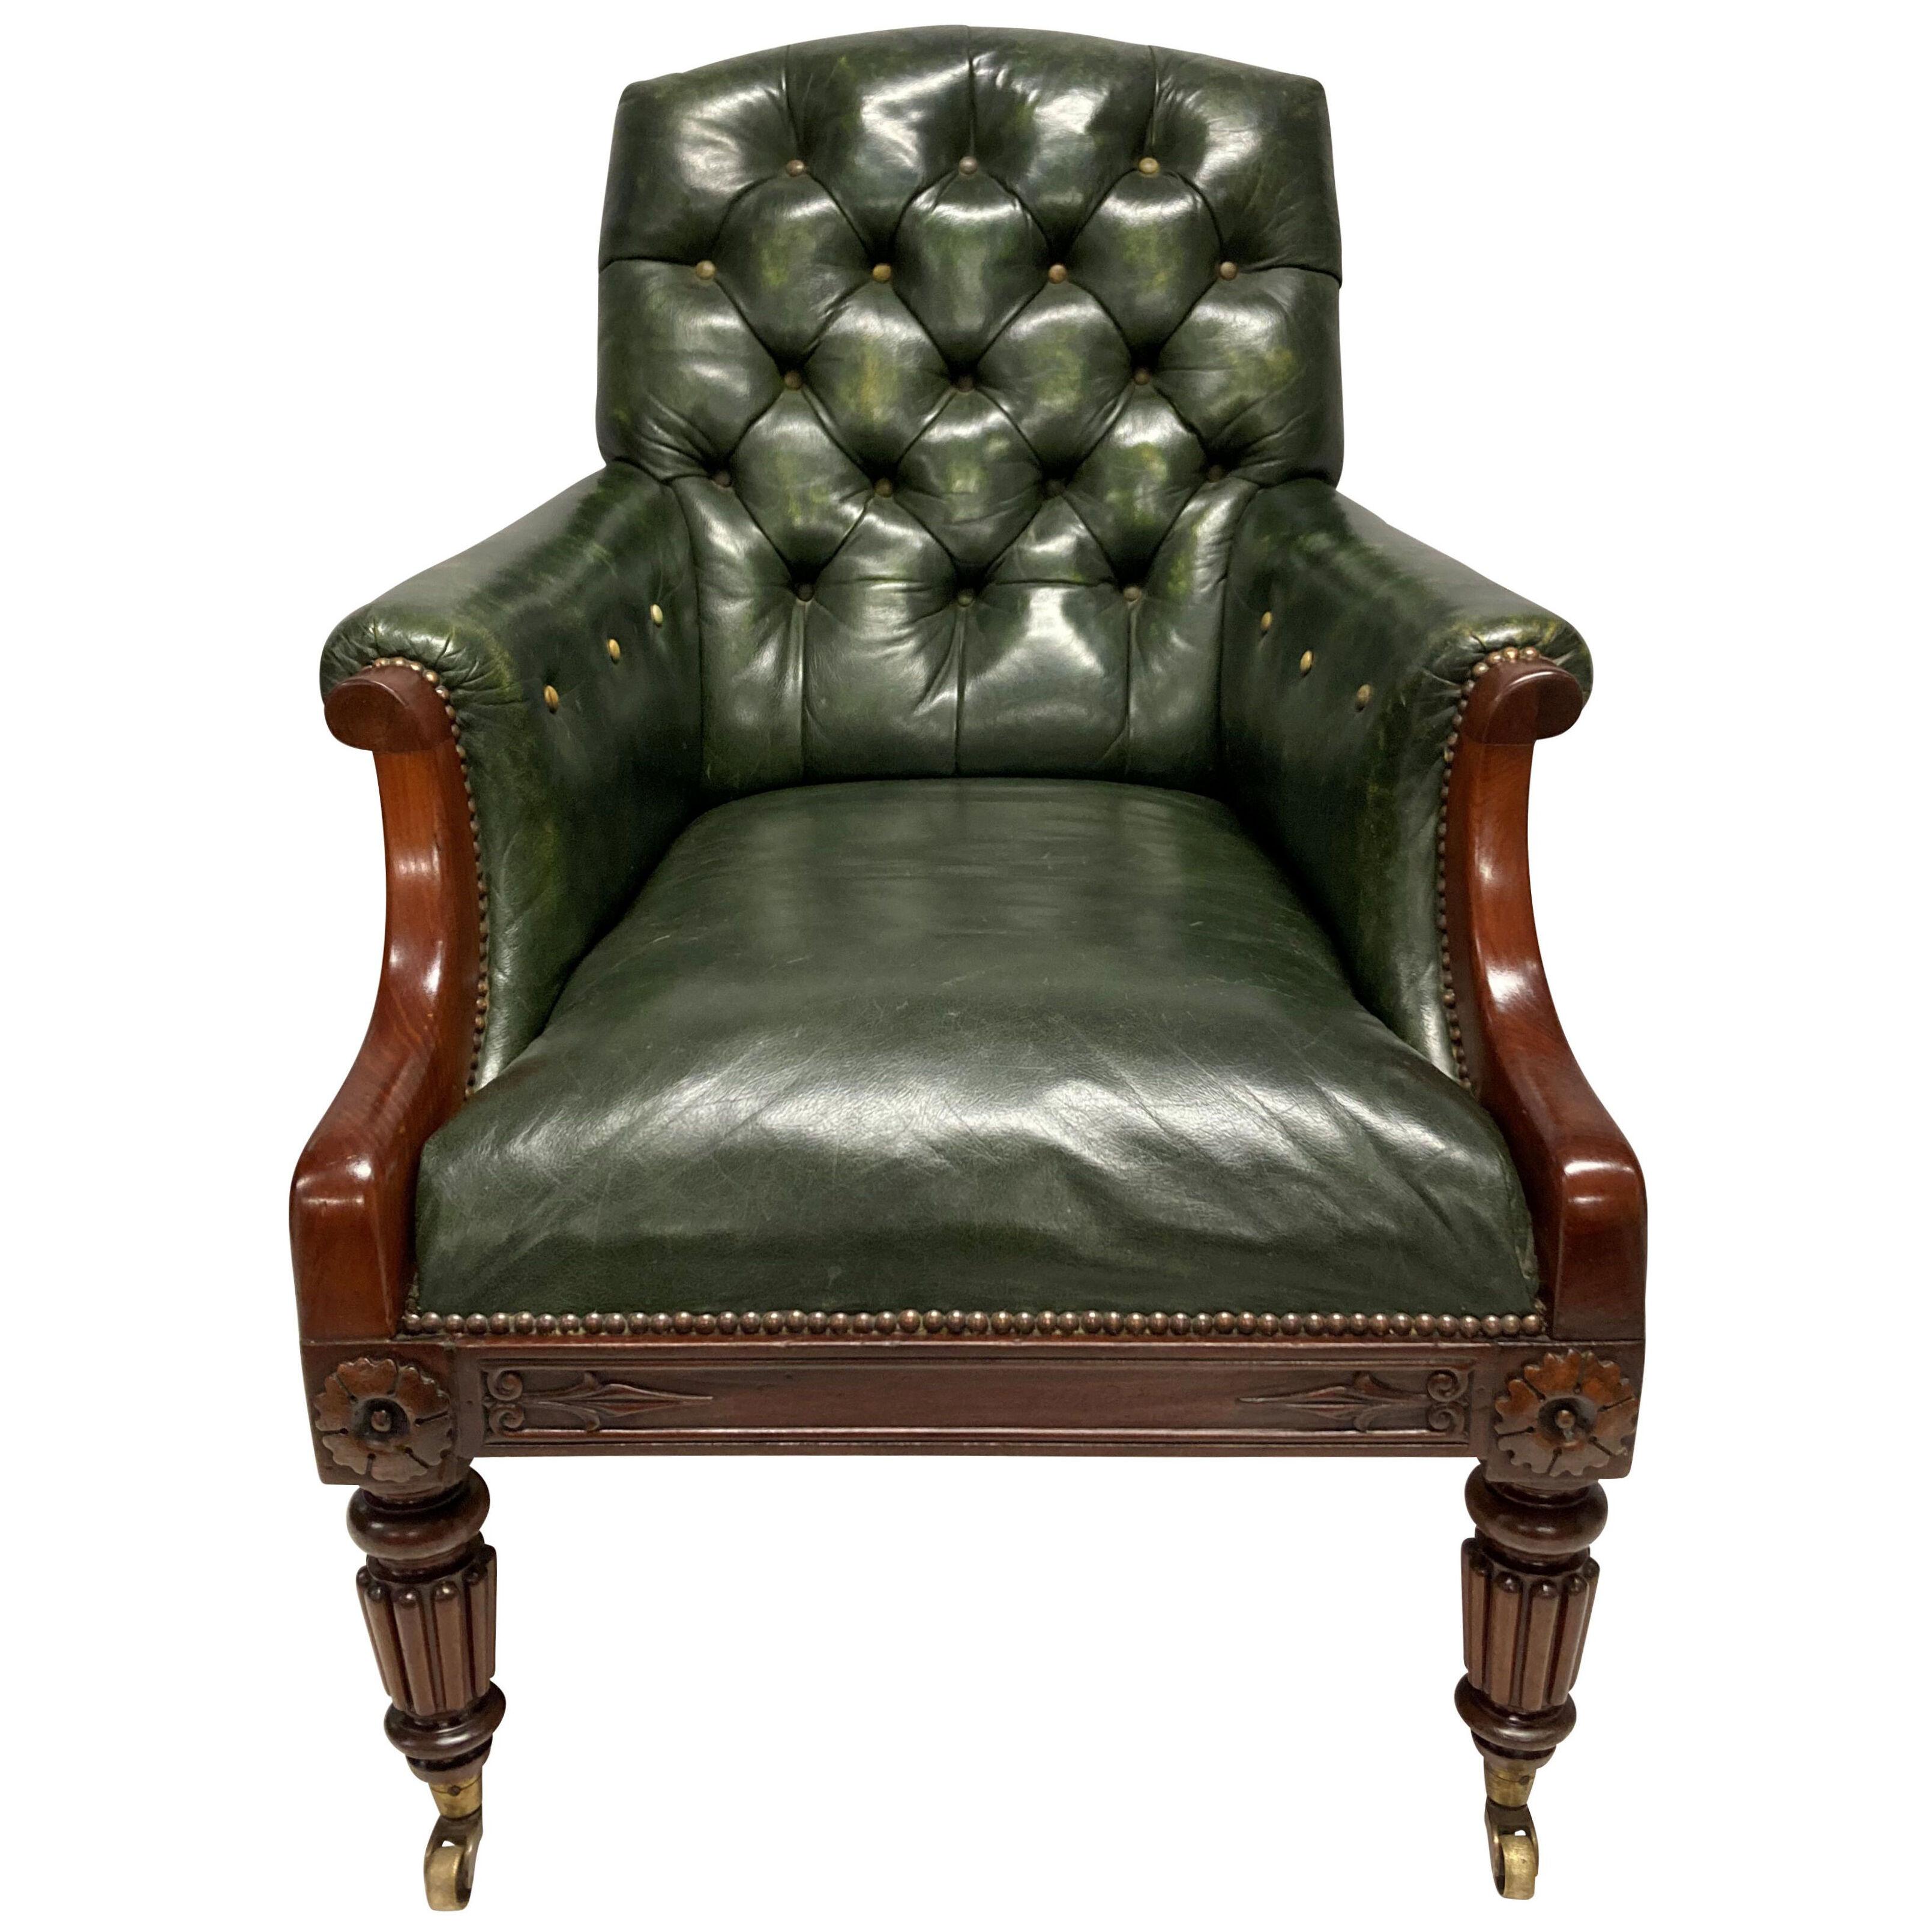 A WILLIAM IV MAHOGANY & LEATHER LIBRARY CHAIR